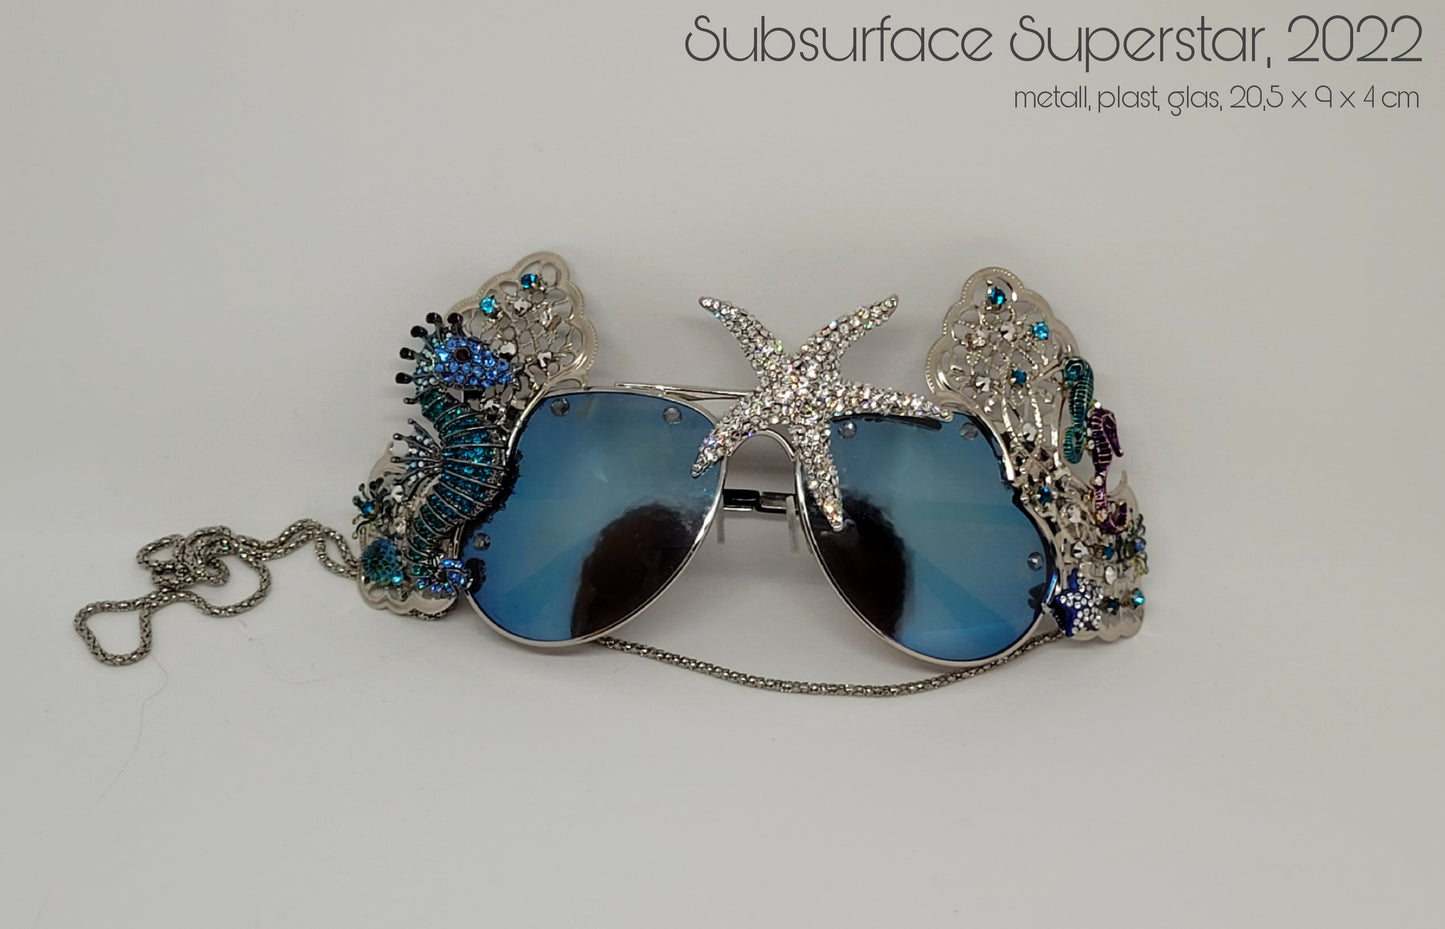 Shifting Depths collection: the Subsurface Superstar sculptural sunglasses